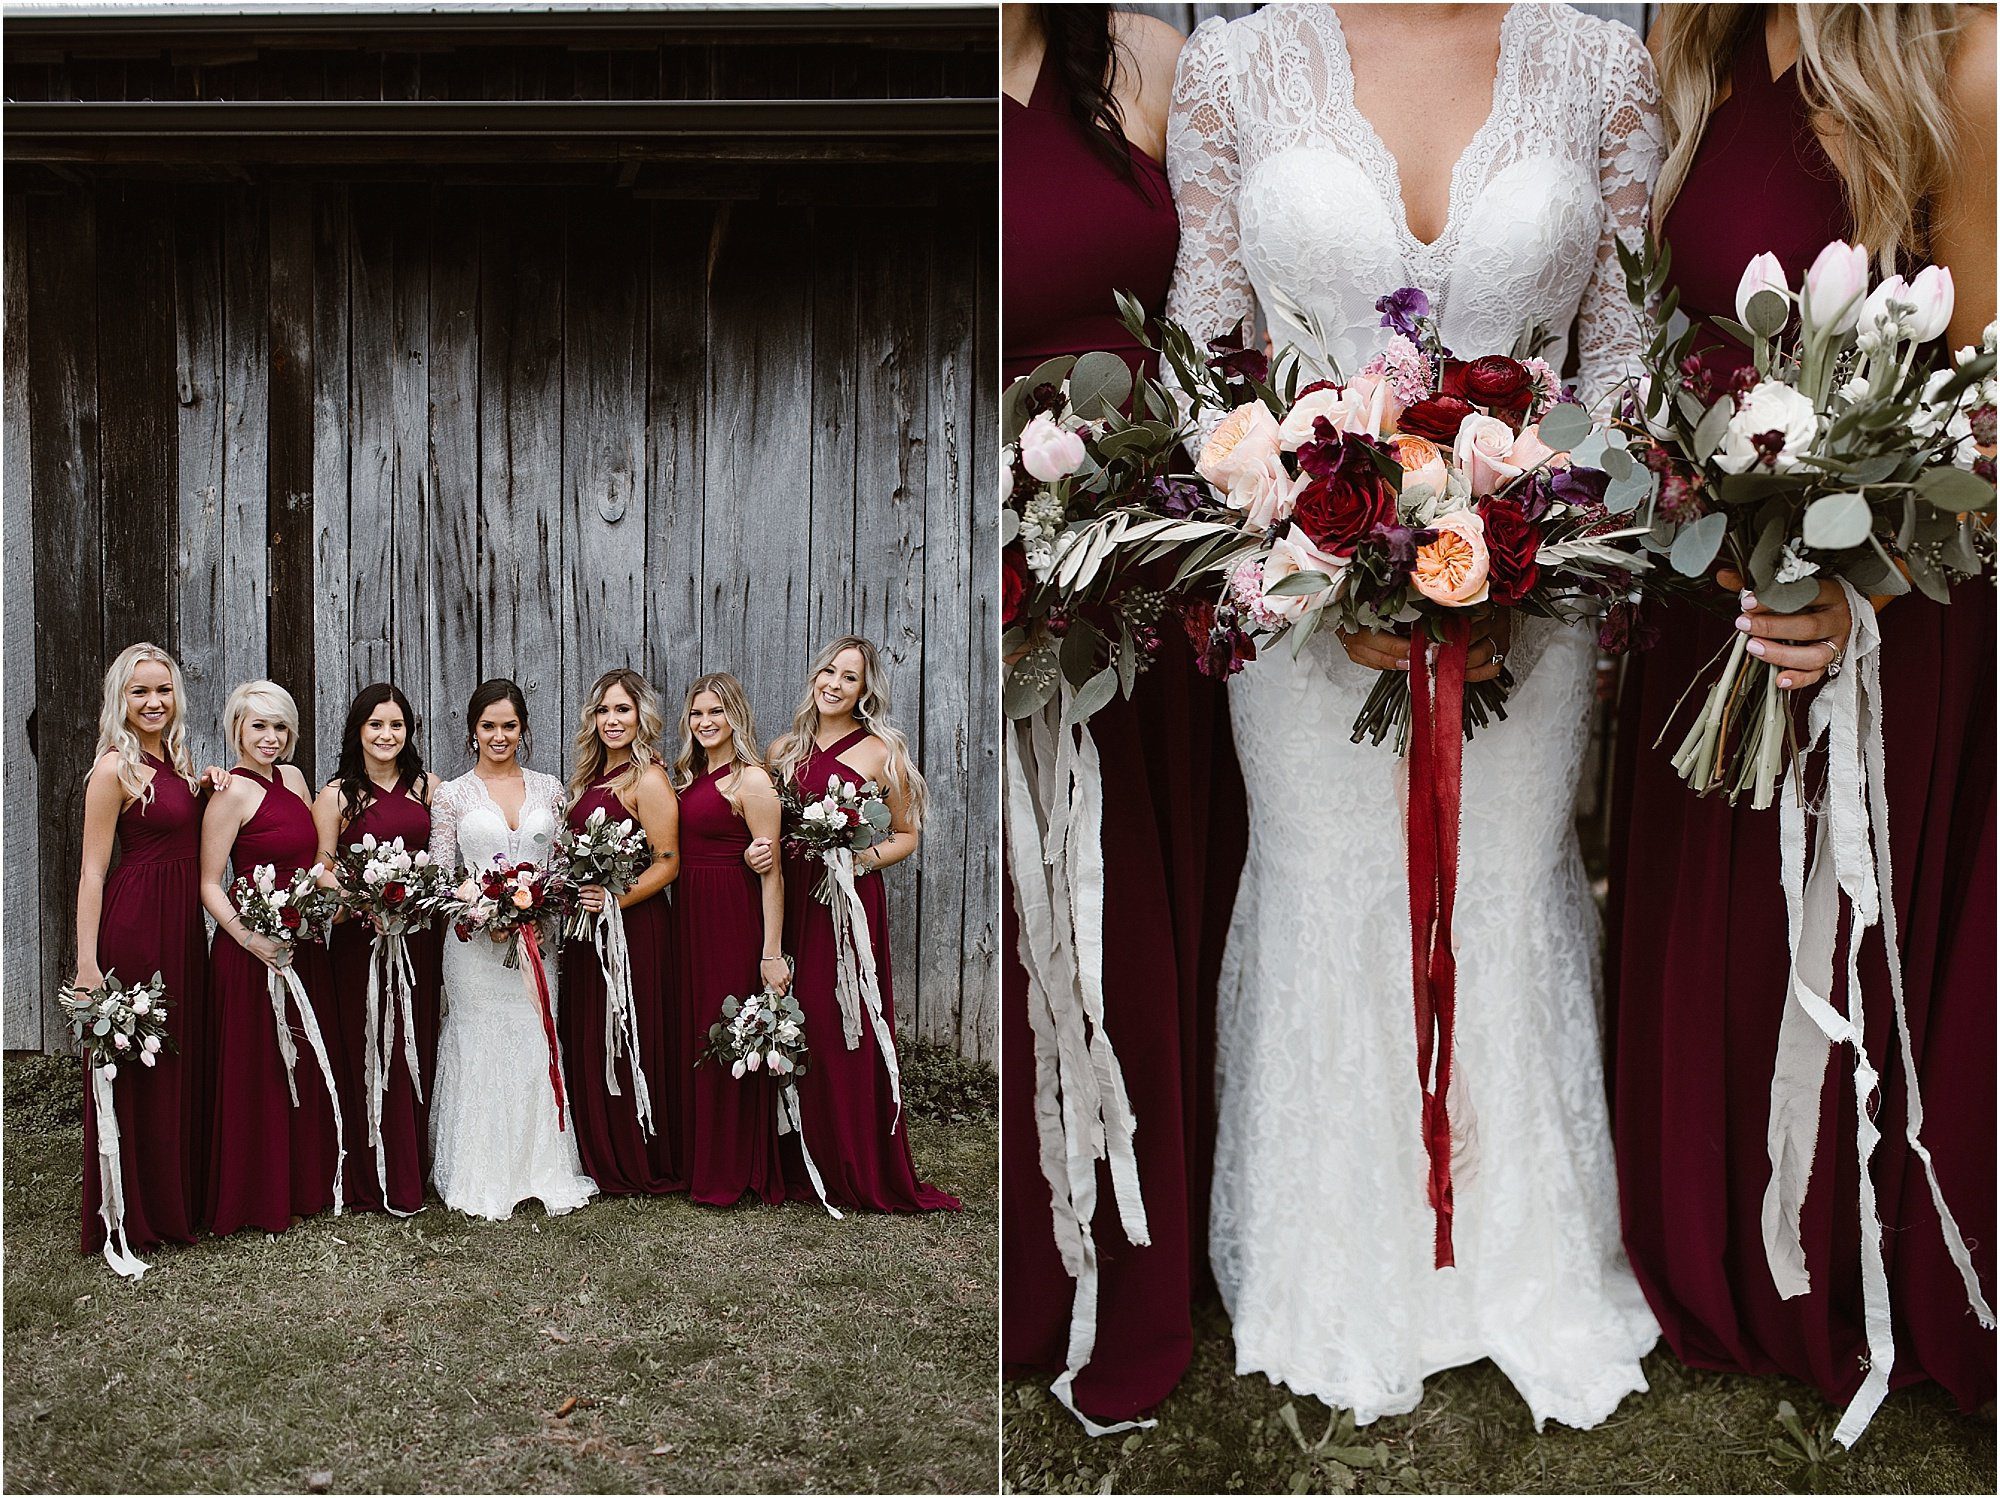 Winter Weddings in Knoxville | Erin Morrison Photography www.erinmorrisonphotography.com